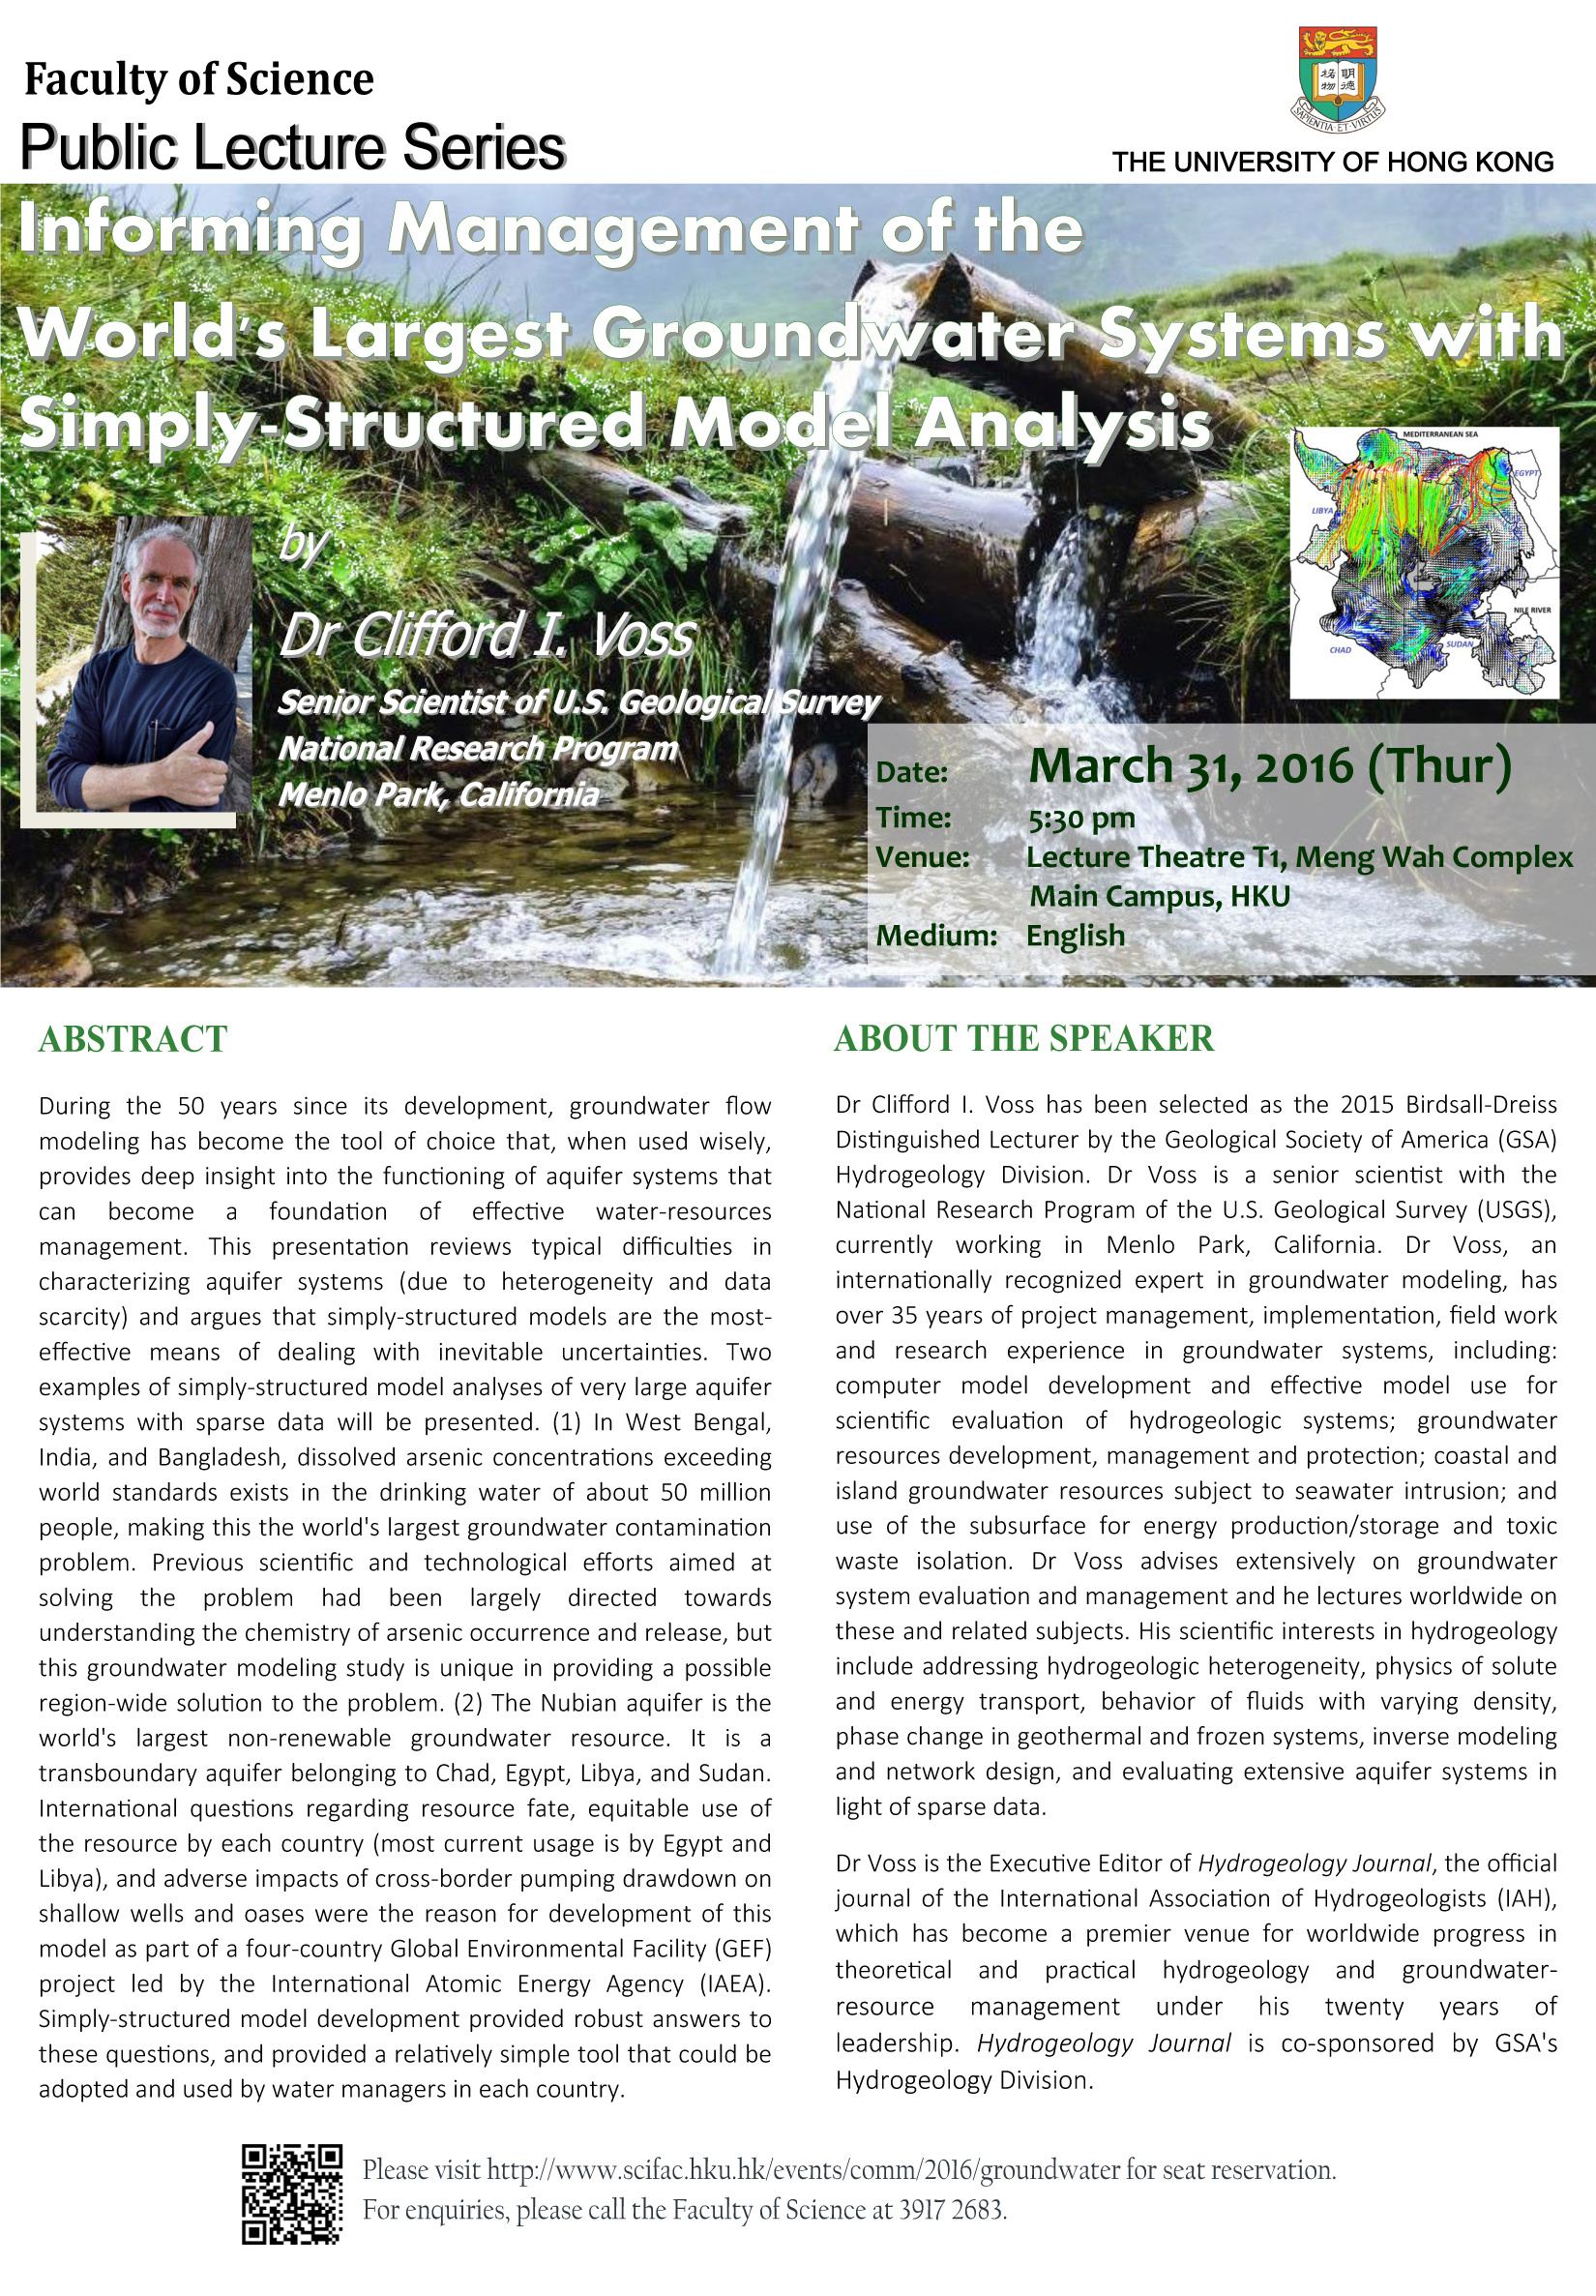 Public Lecture: Informing Management of the World's Largest Groundwater Systems with Simply-Structured Model Analysis